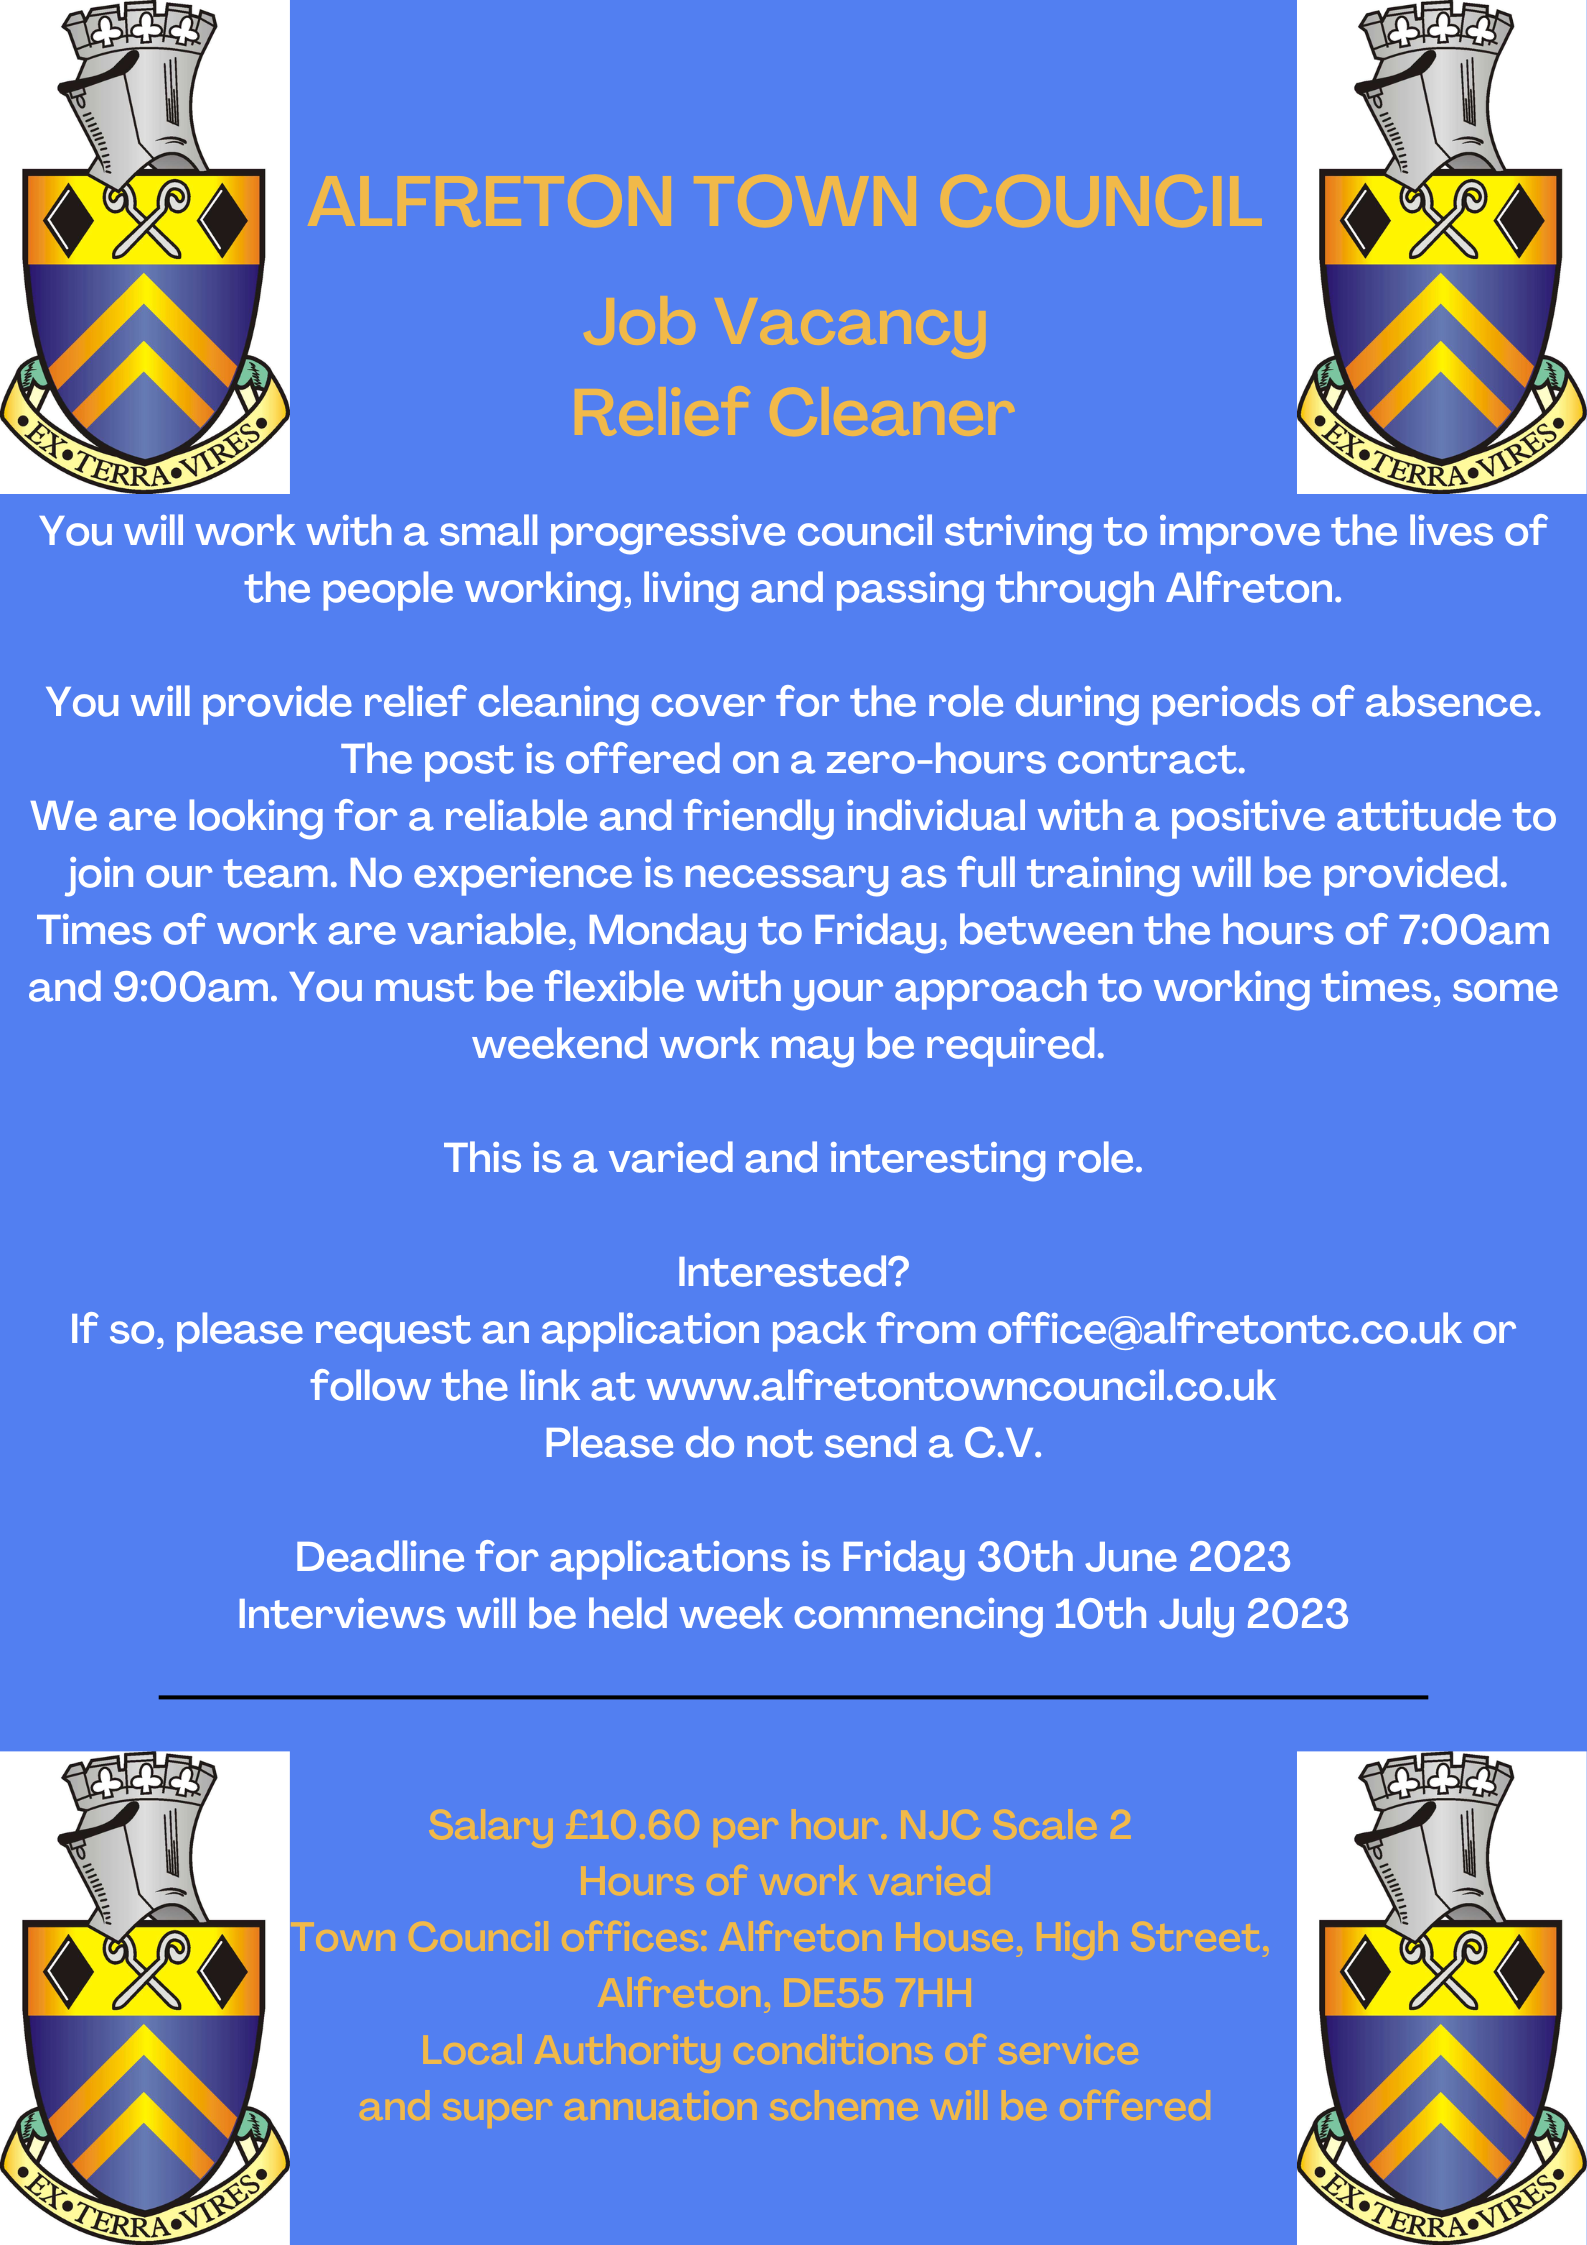 Alfreton Town Council is recruiting for a relief cleaner